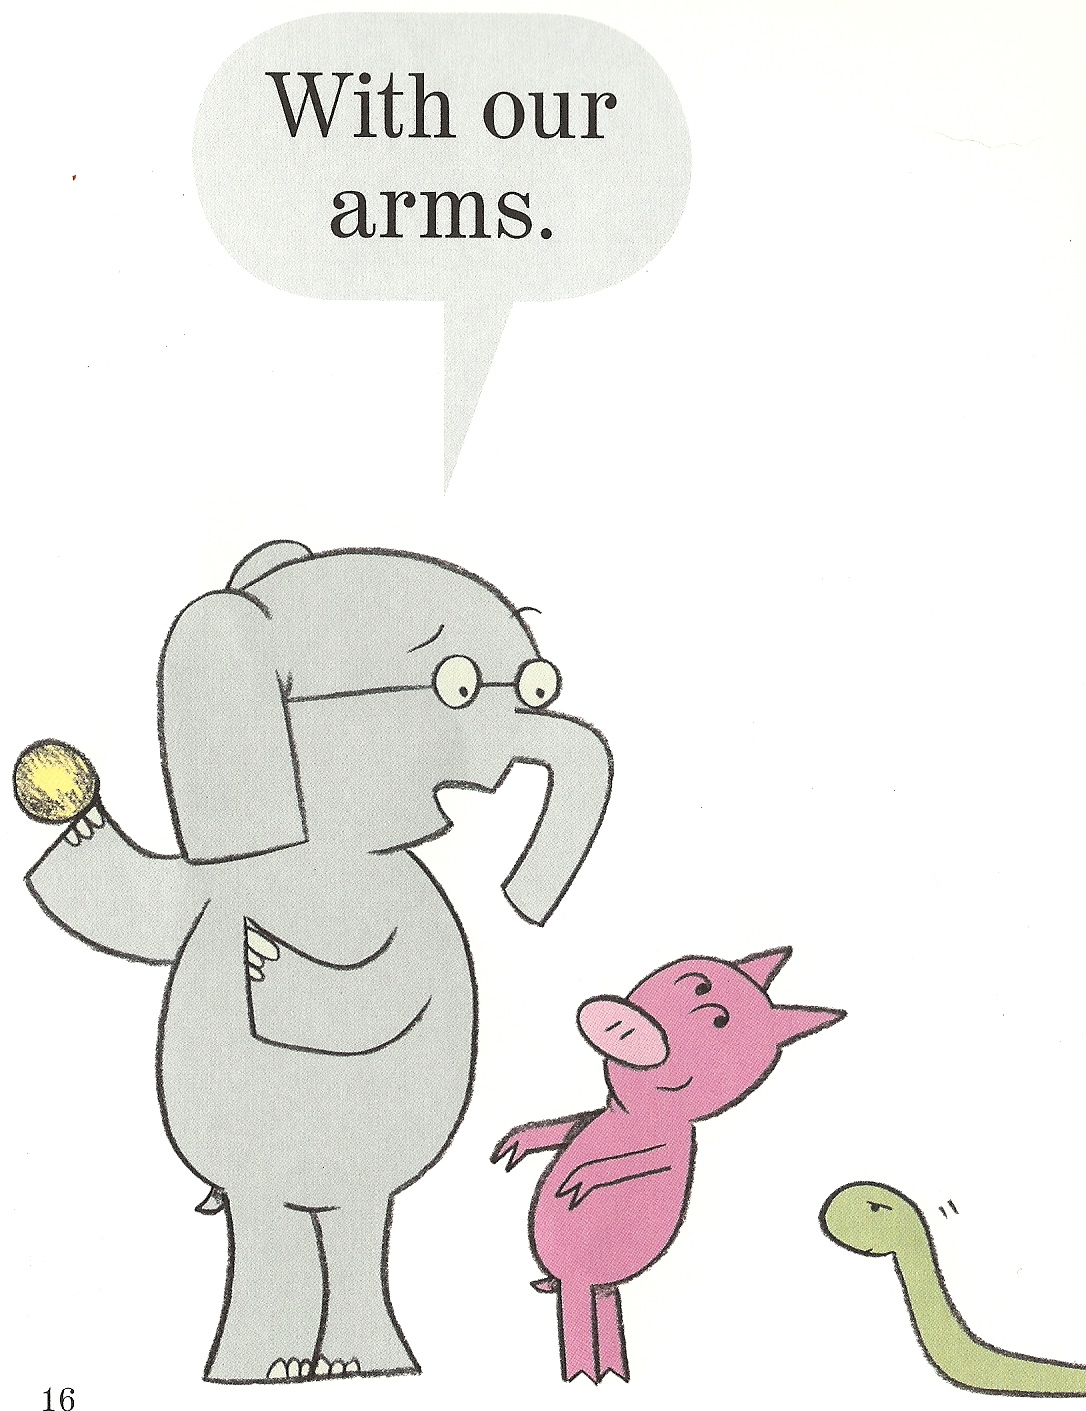 every-day-is-like-wednesday-reminder-mo-willems-elephant-piggie-books-are-great-books-and